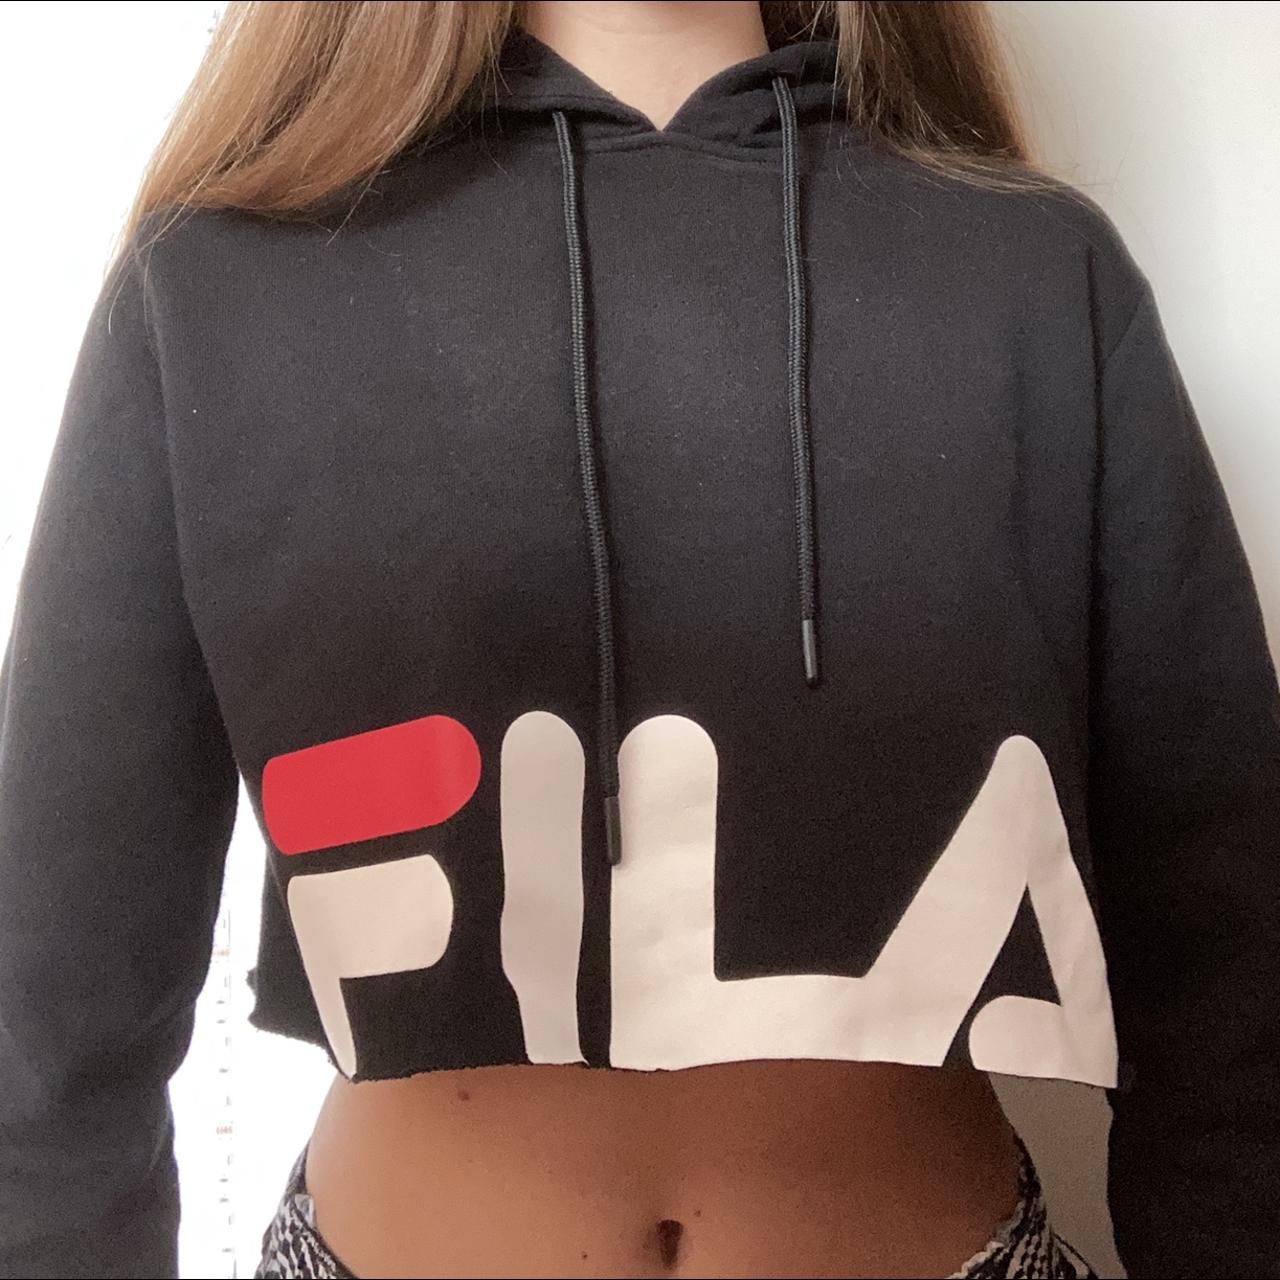 Coolest fila cropped hoodie. Worn very rarely and in... - Depop